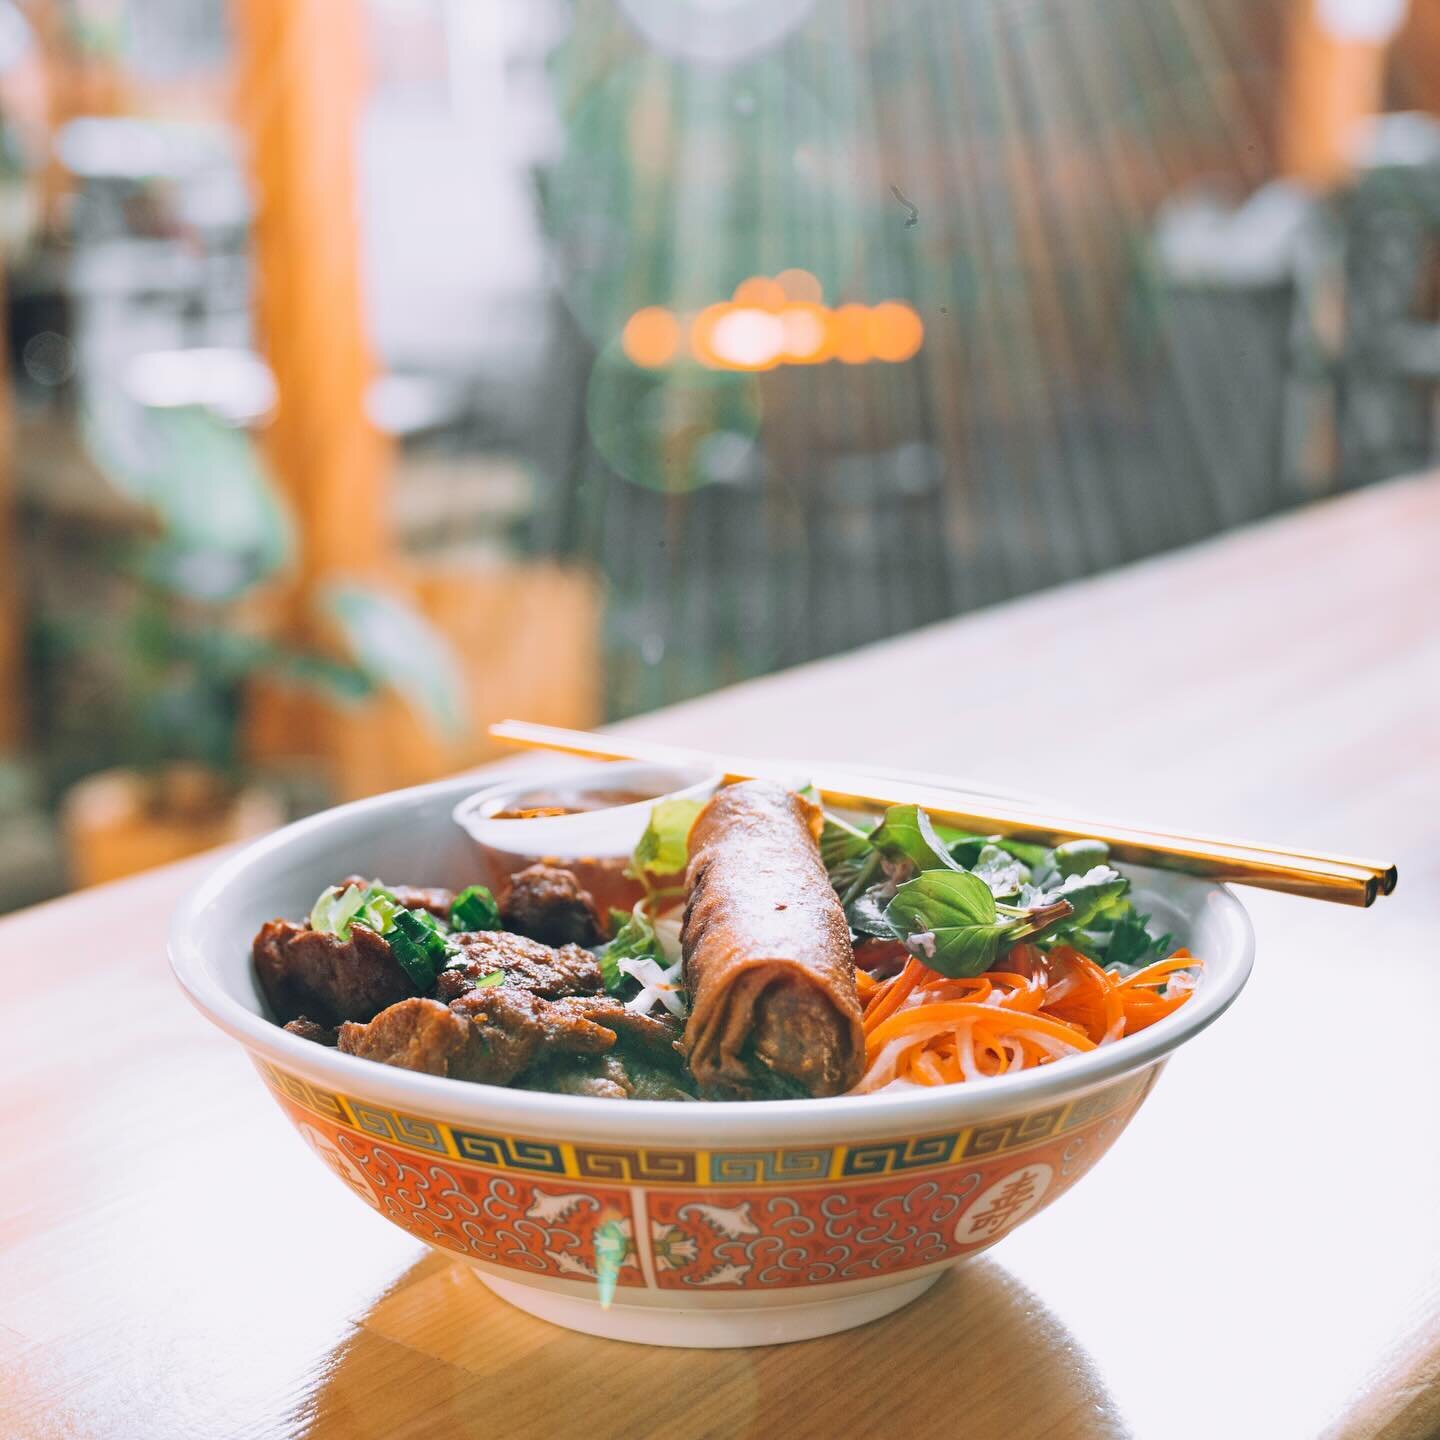 the ab&uacute;ndance bowl that could - vegan ab&uacute;ndance bowl with chewy crispy tofu skin ( so good you&rsquo;d think it&rsquo;s meat ) b&uacute;n: rice vermicelli, impossible lil egg roll, vegan fish sauce, viet herbs, picked veg &amp; abundanc